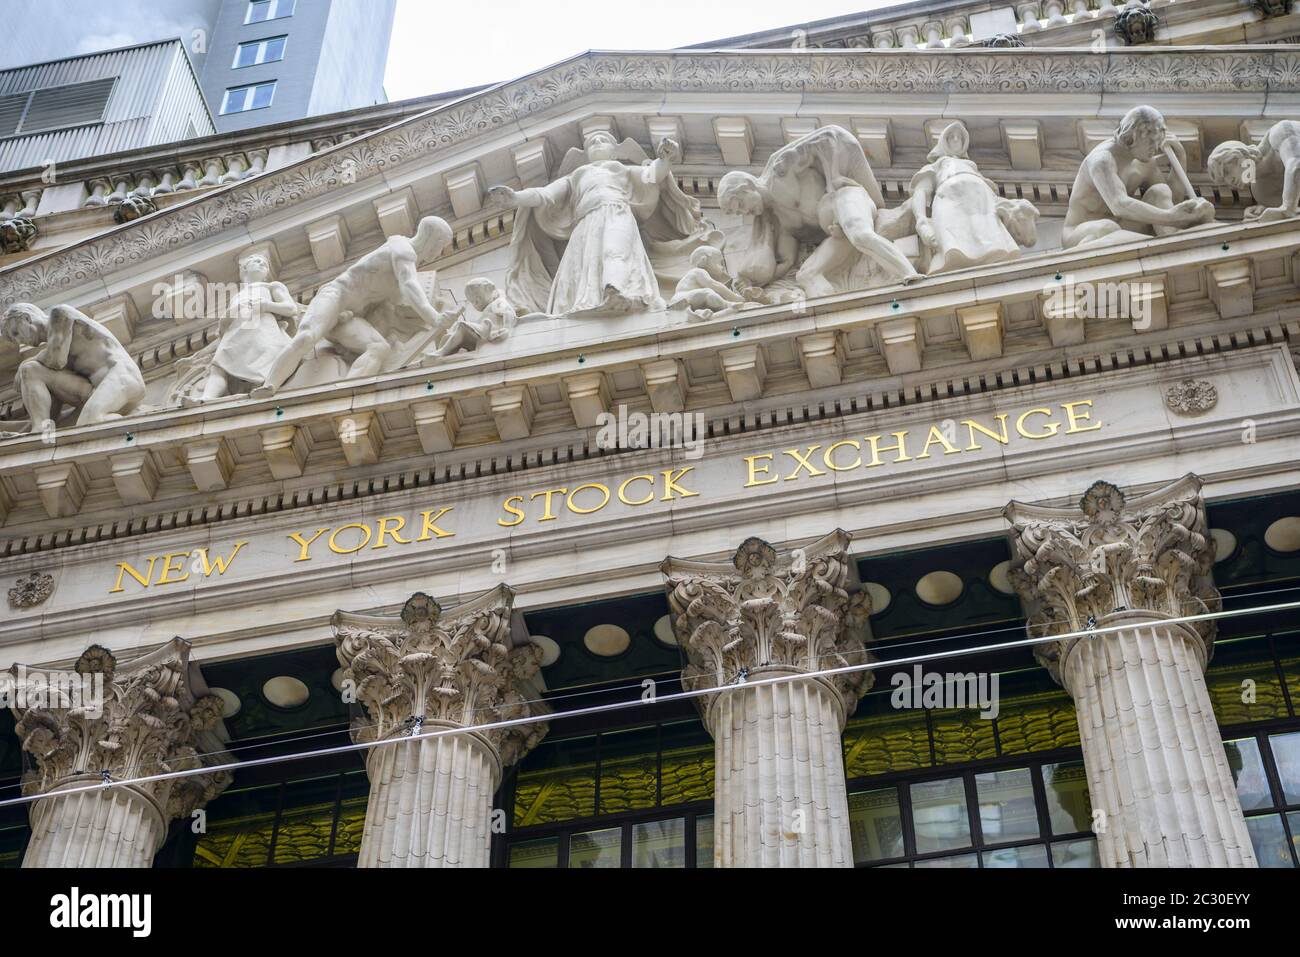 New York stock Exchange Building, NYSE, Wall Street, Financial District, Manhattan, New York City, New York State, Etats-Unis Banque D'Images